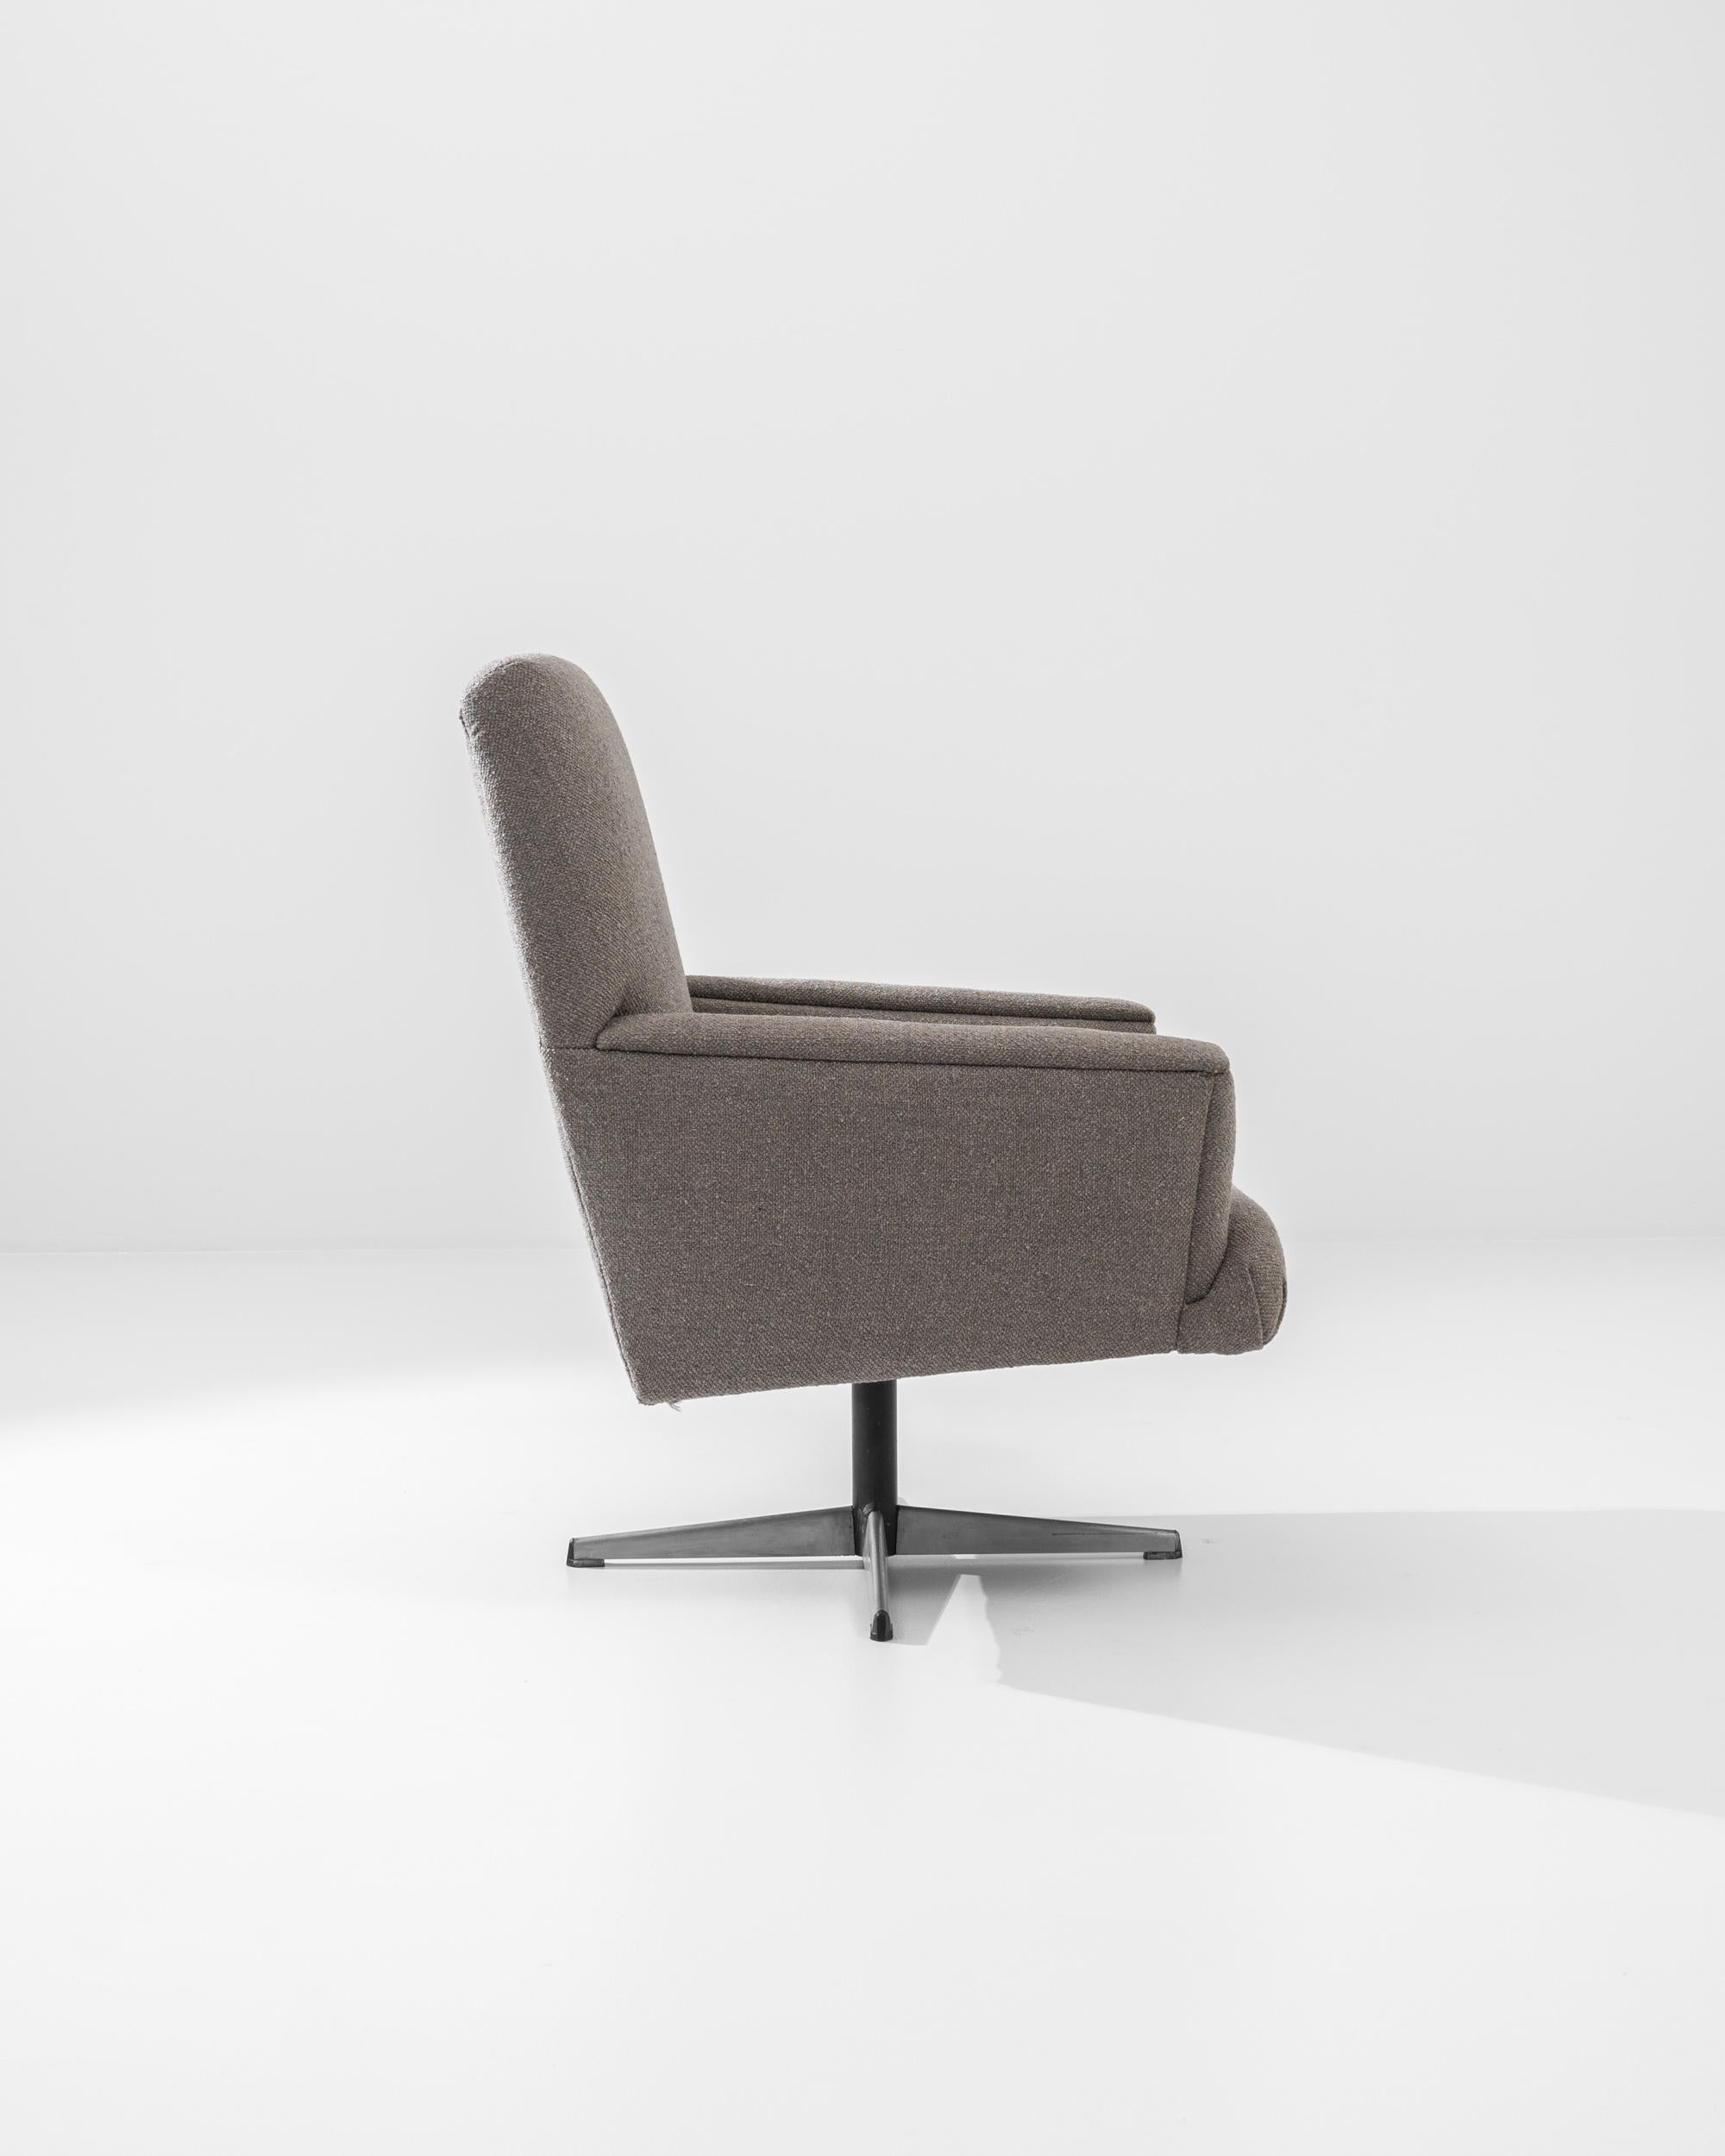 Stylish and sophisticated, this vintage rotary armchair cuts a handsome figure. Made in France, the design provokes nostalgia for the chic offices of the 1960s. The chair rotates upon a central pillar — a mechanism originally designed to help